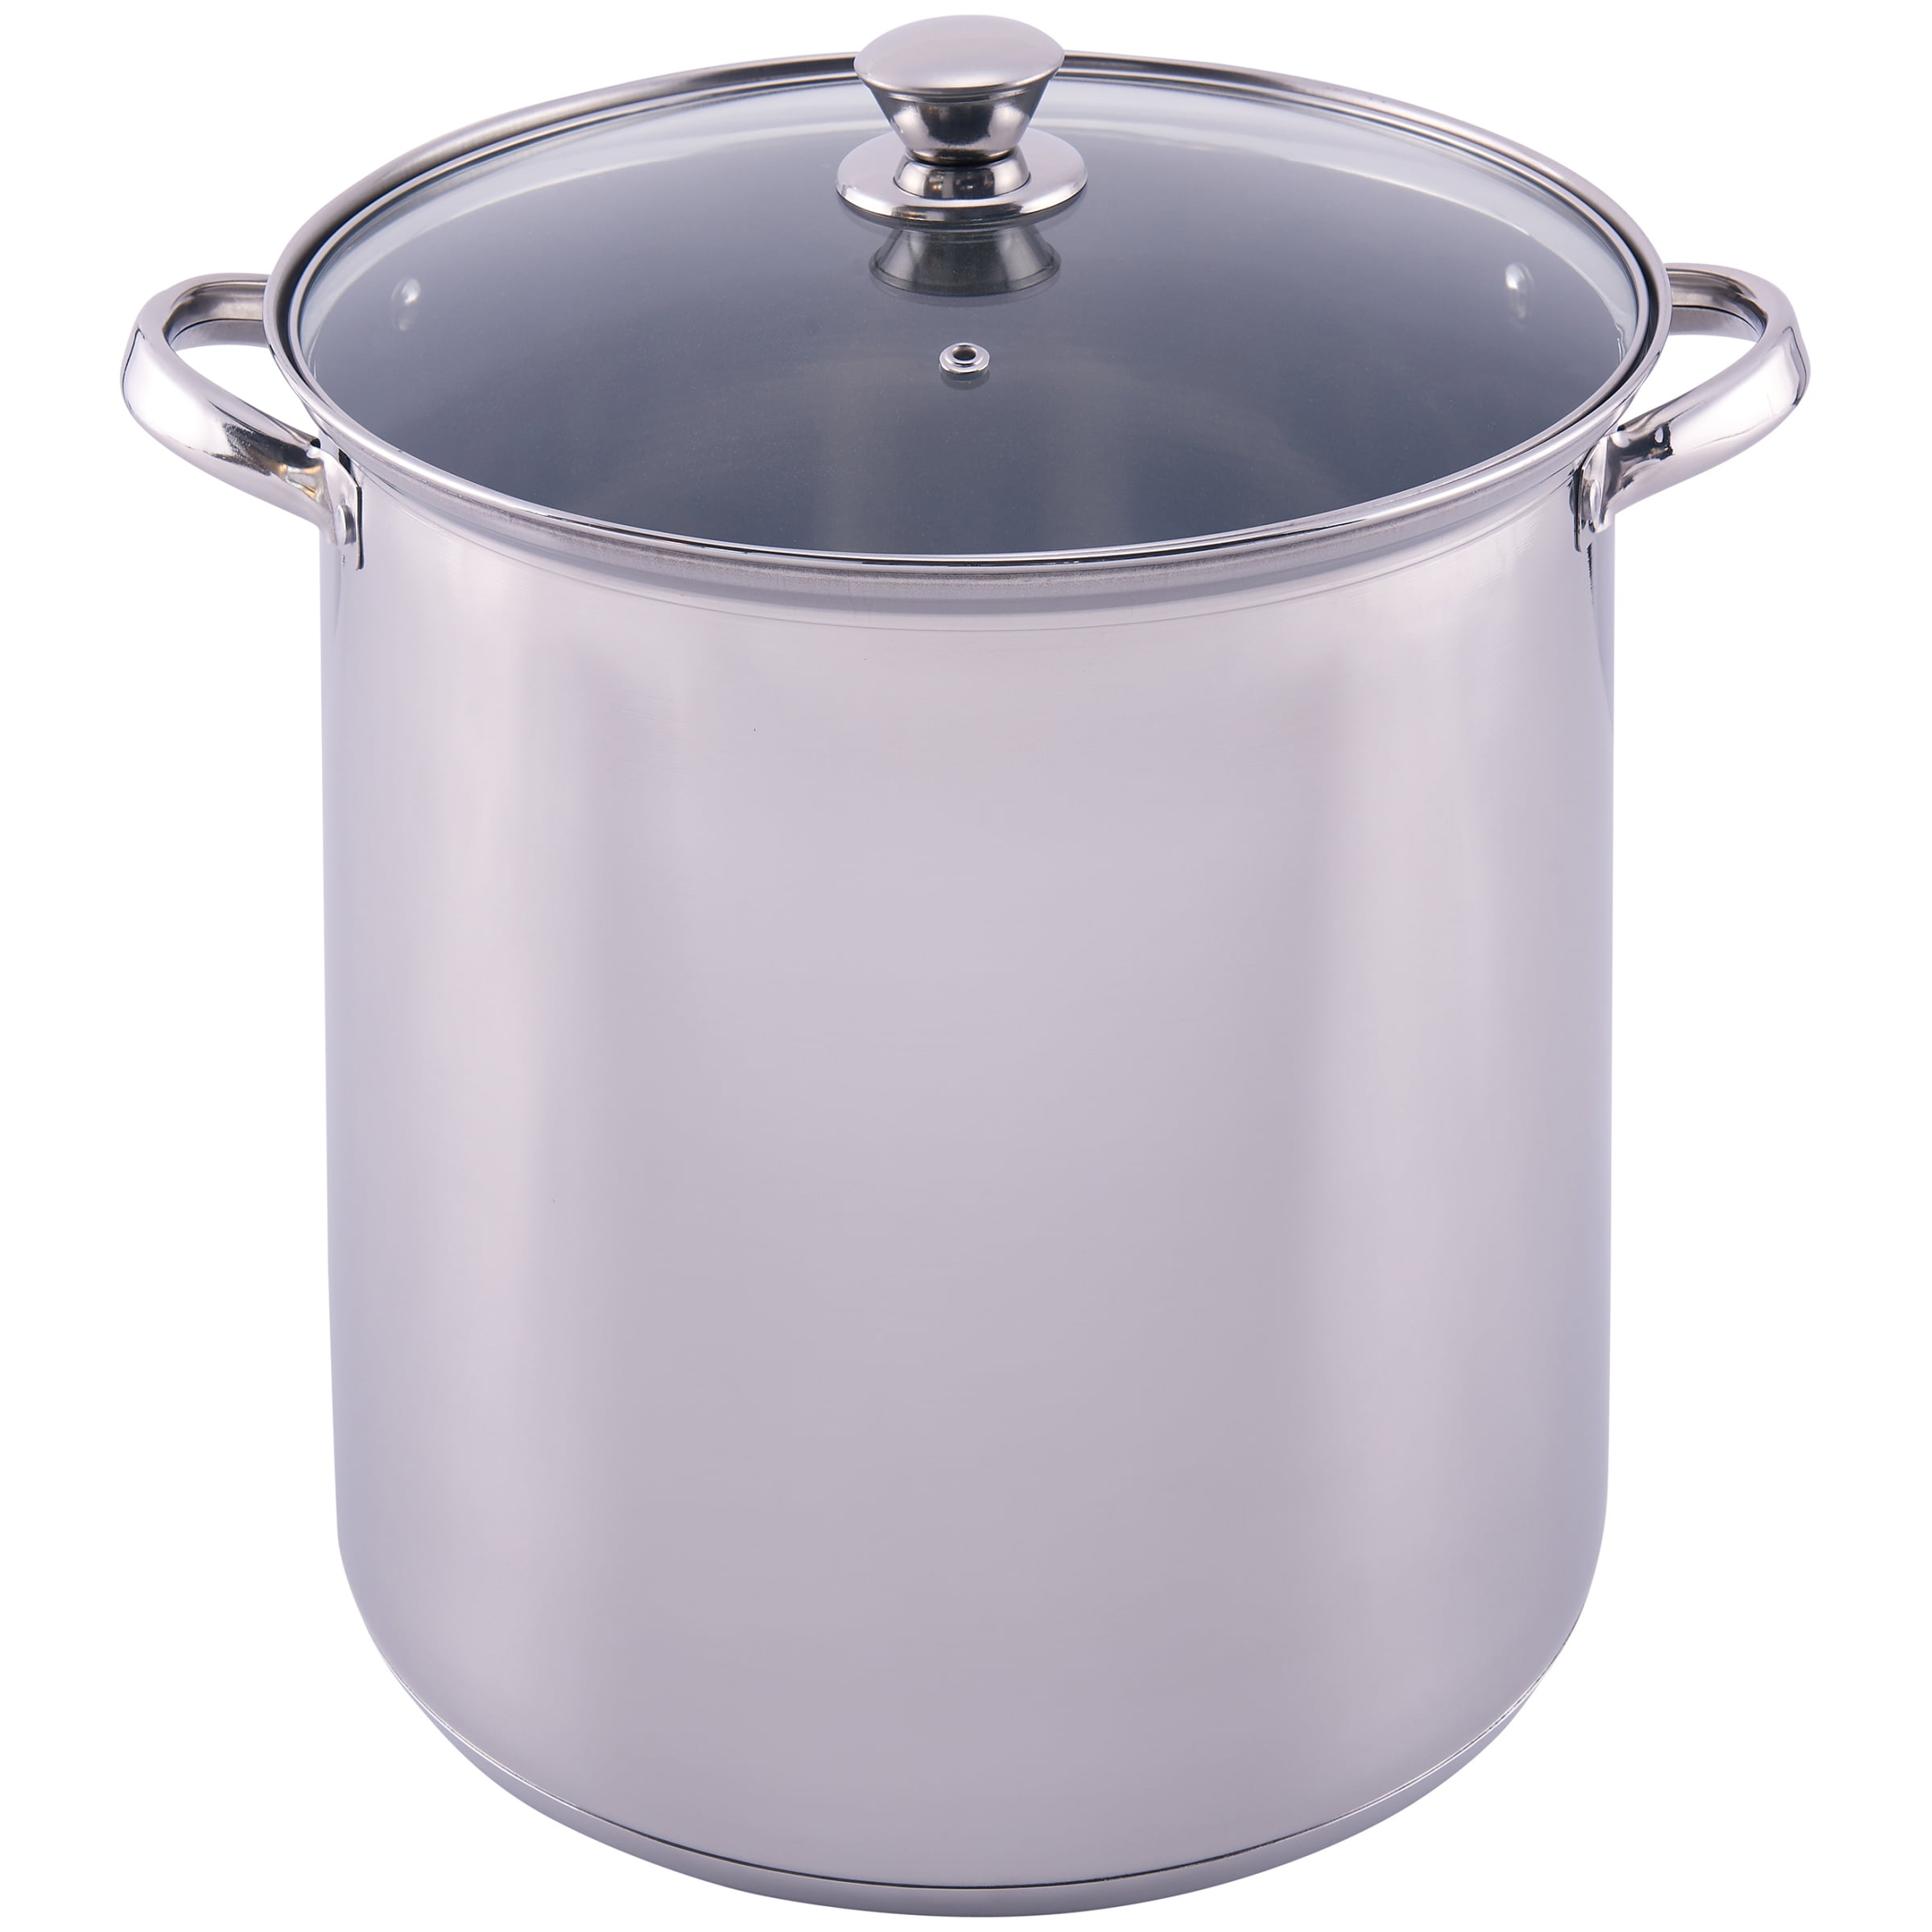 Mainstays Stainless Steel 16 Quart Stockpot with Lid